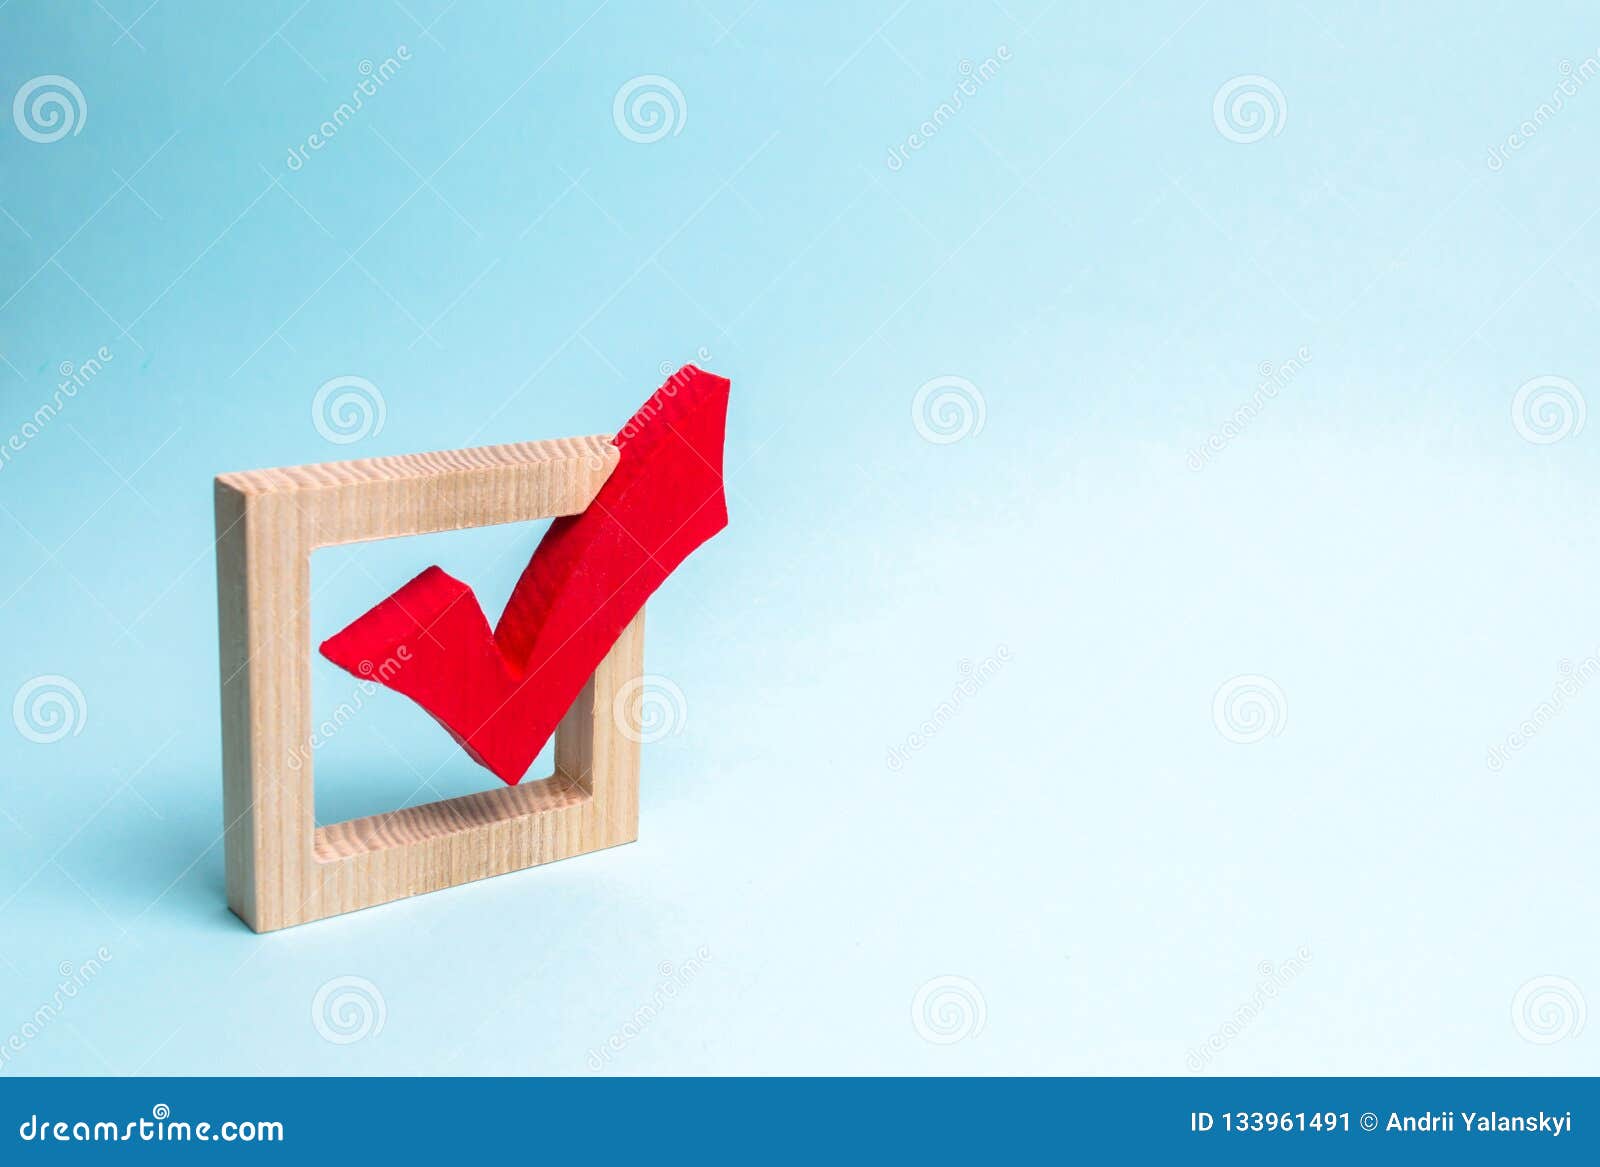 red wooden checkmark for voting on elections on a blue background. presidency or parliamentary elections, a referendum. survey